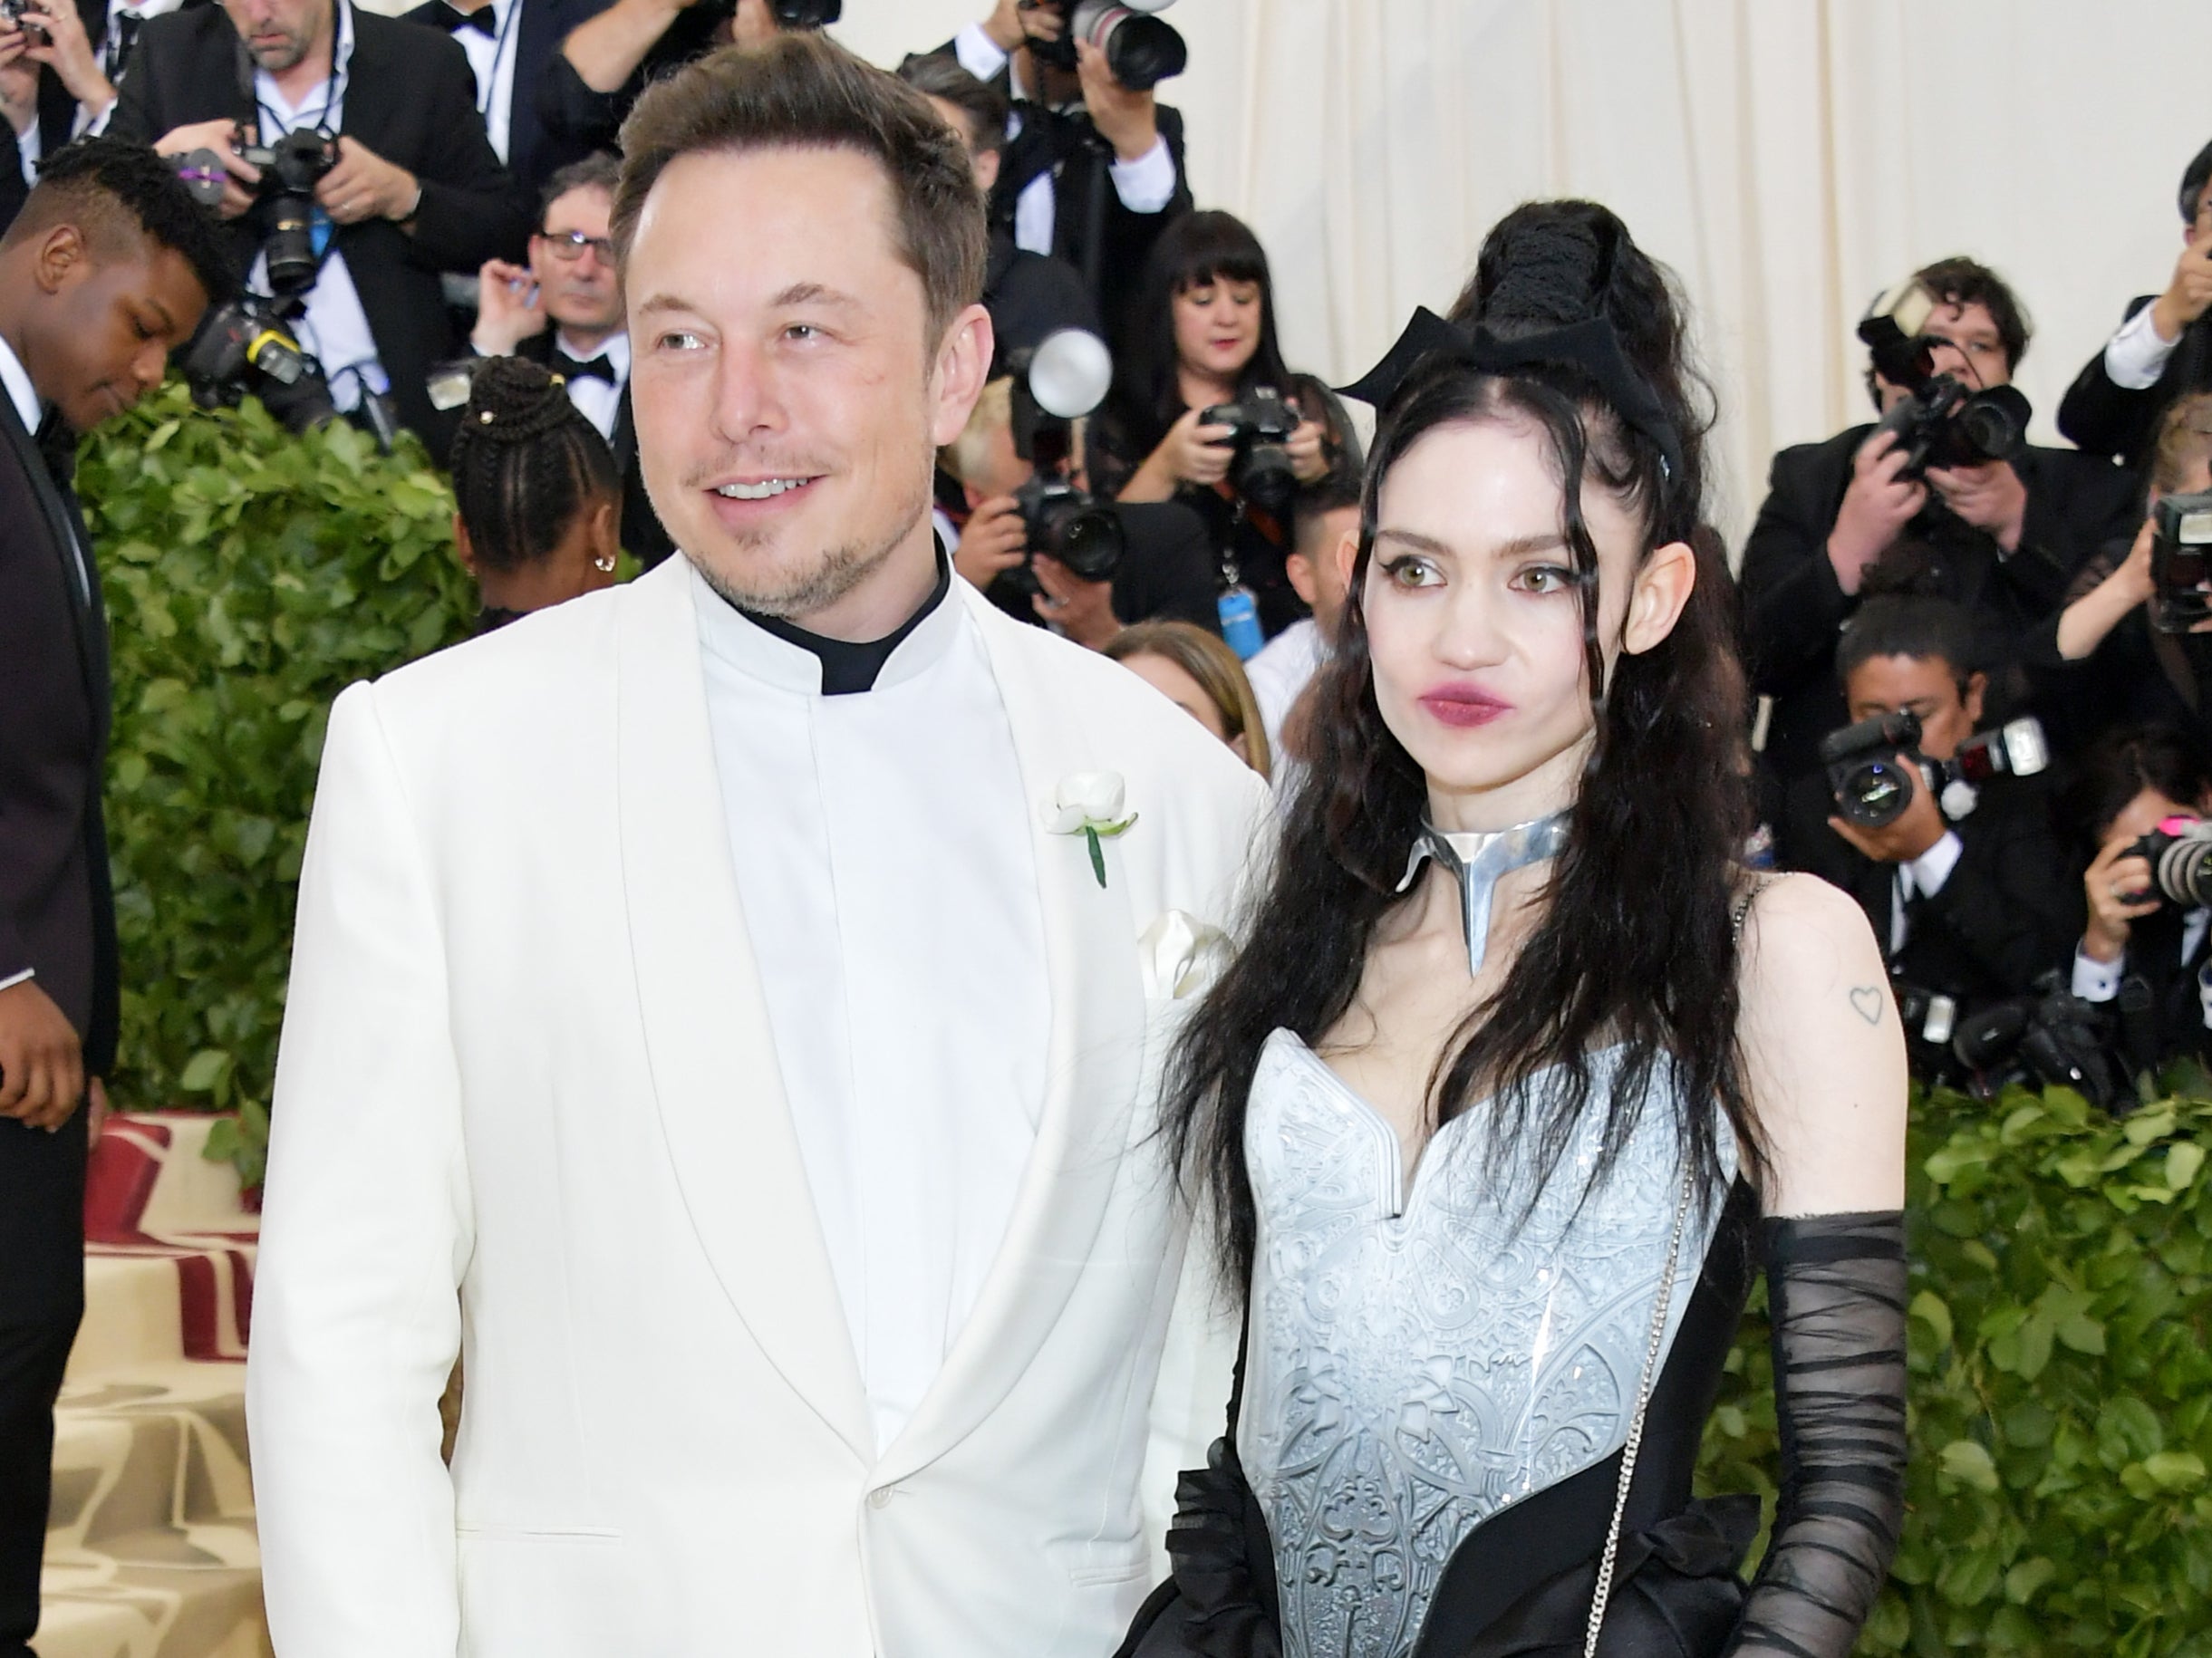 Elon Musk and Grimes at the Met Gala in 2018. The pair have three children together